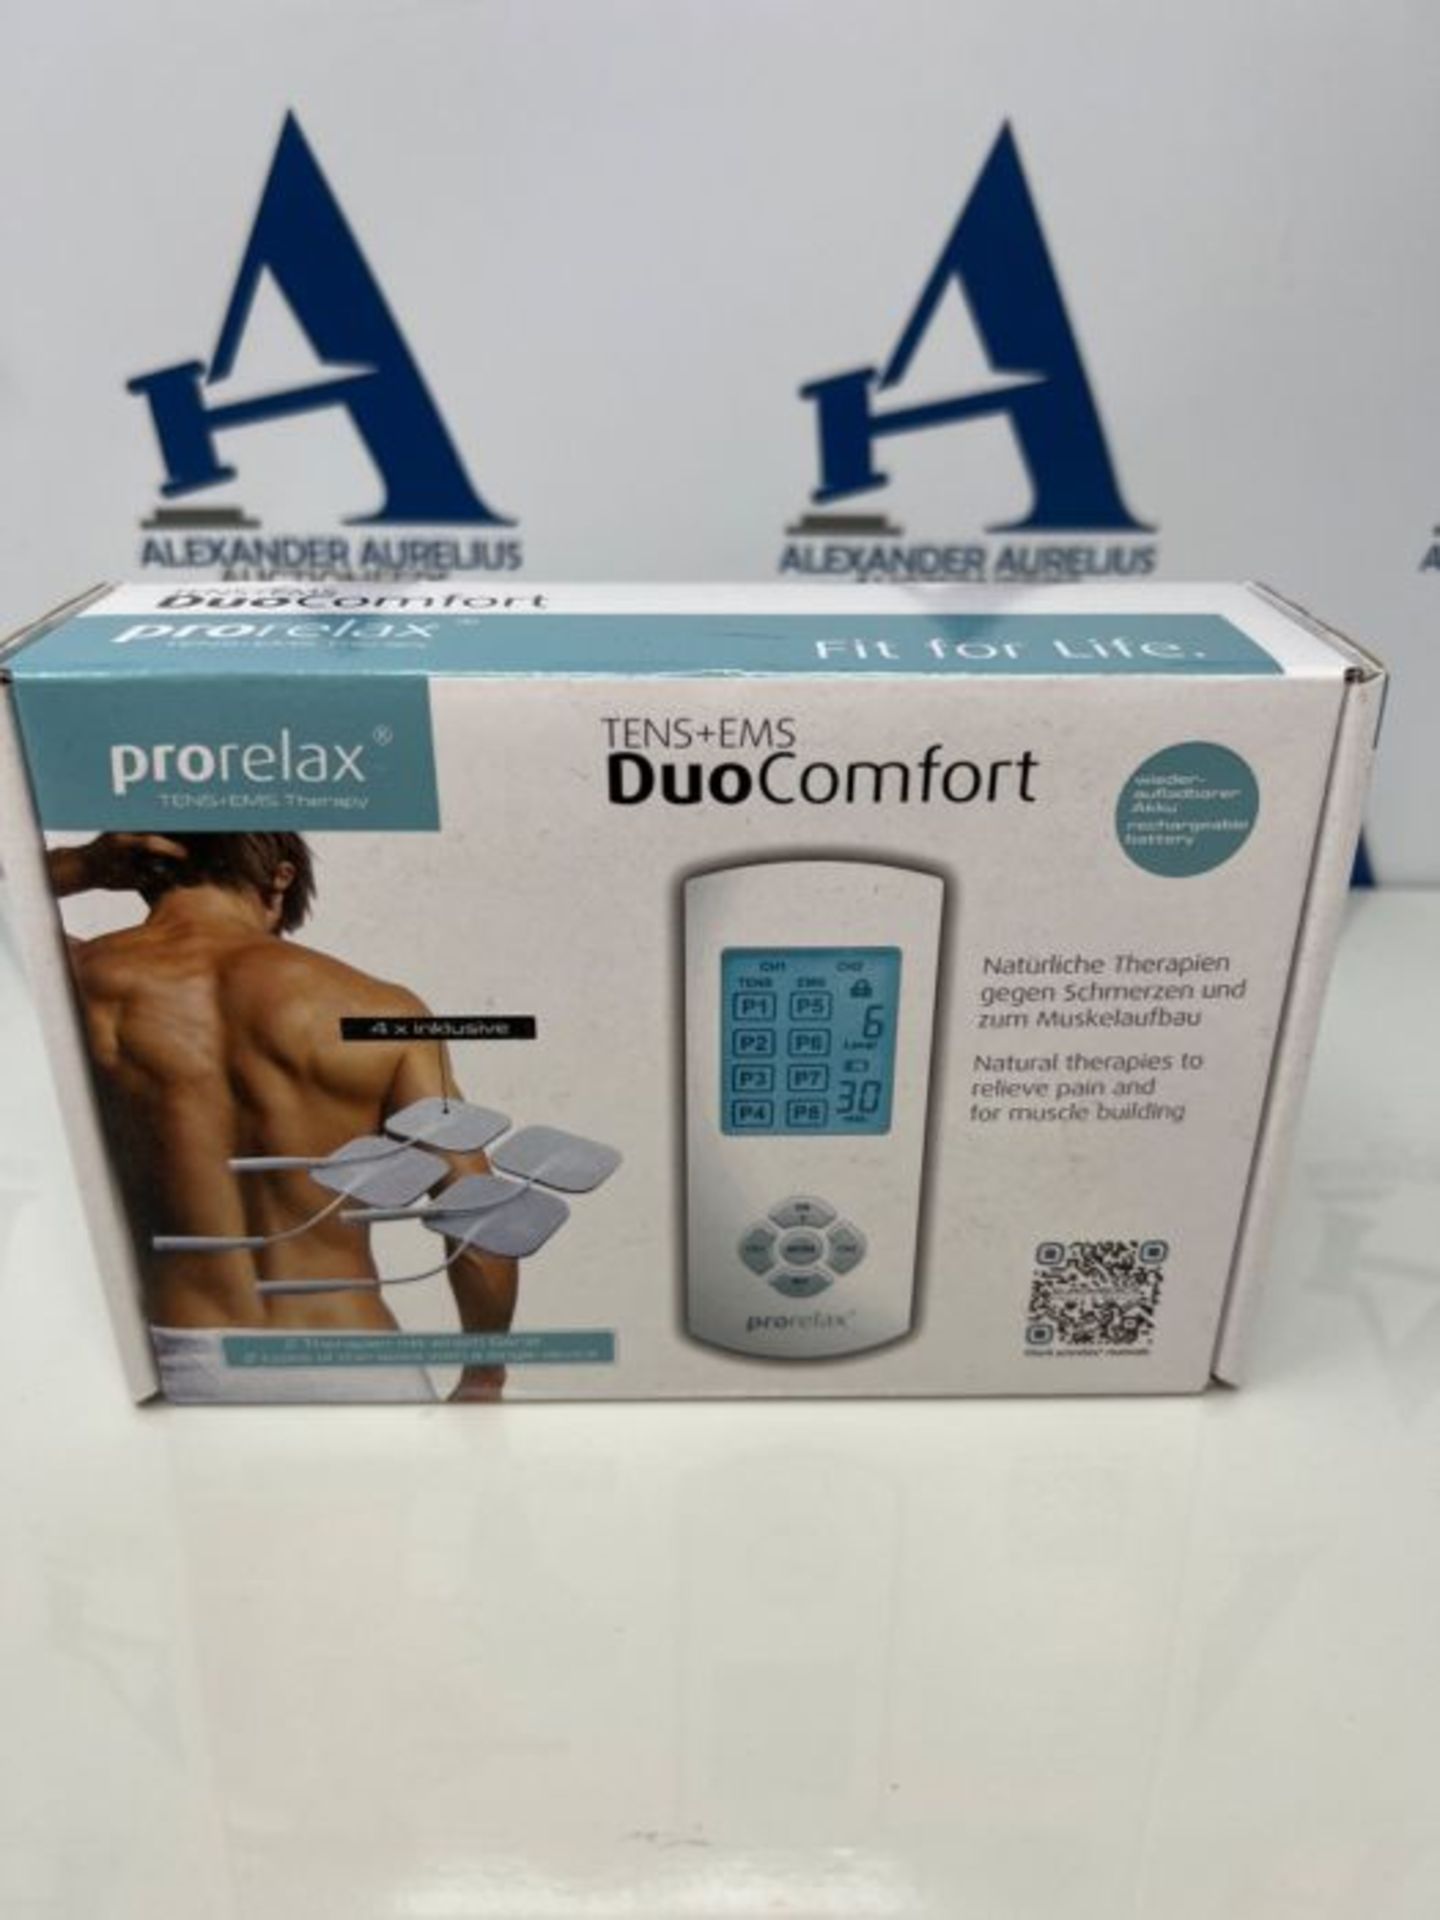 prorelax TENS/EMS Duo Comfort | electrostimulation device | 2 therapies with one devic - Image 2 of 3